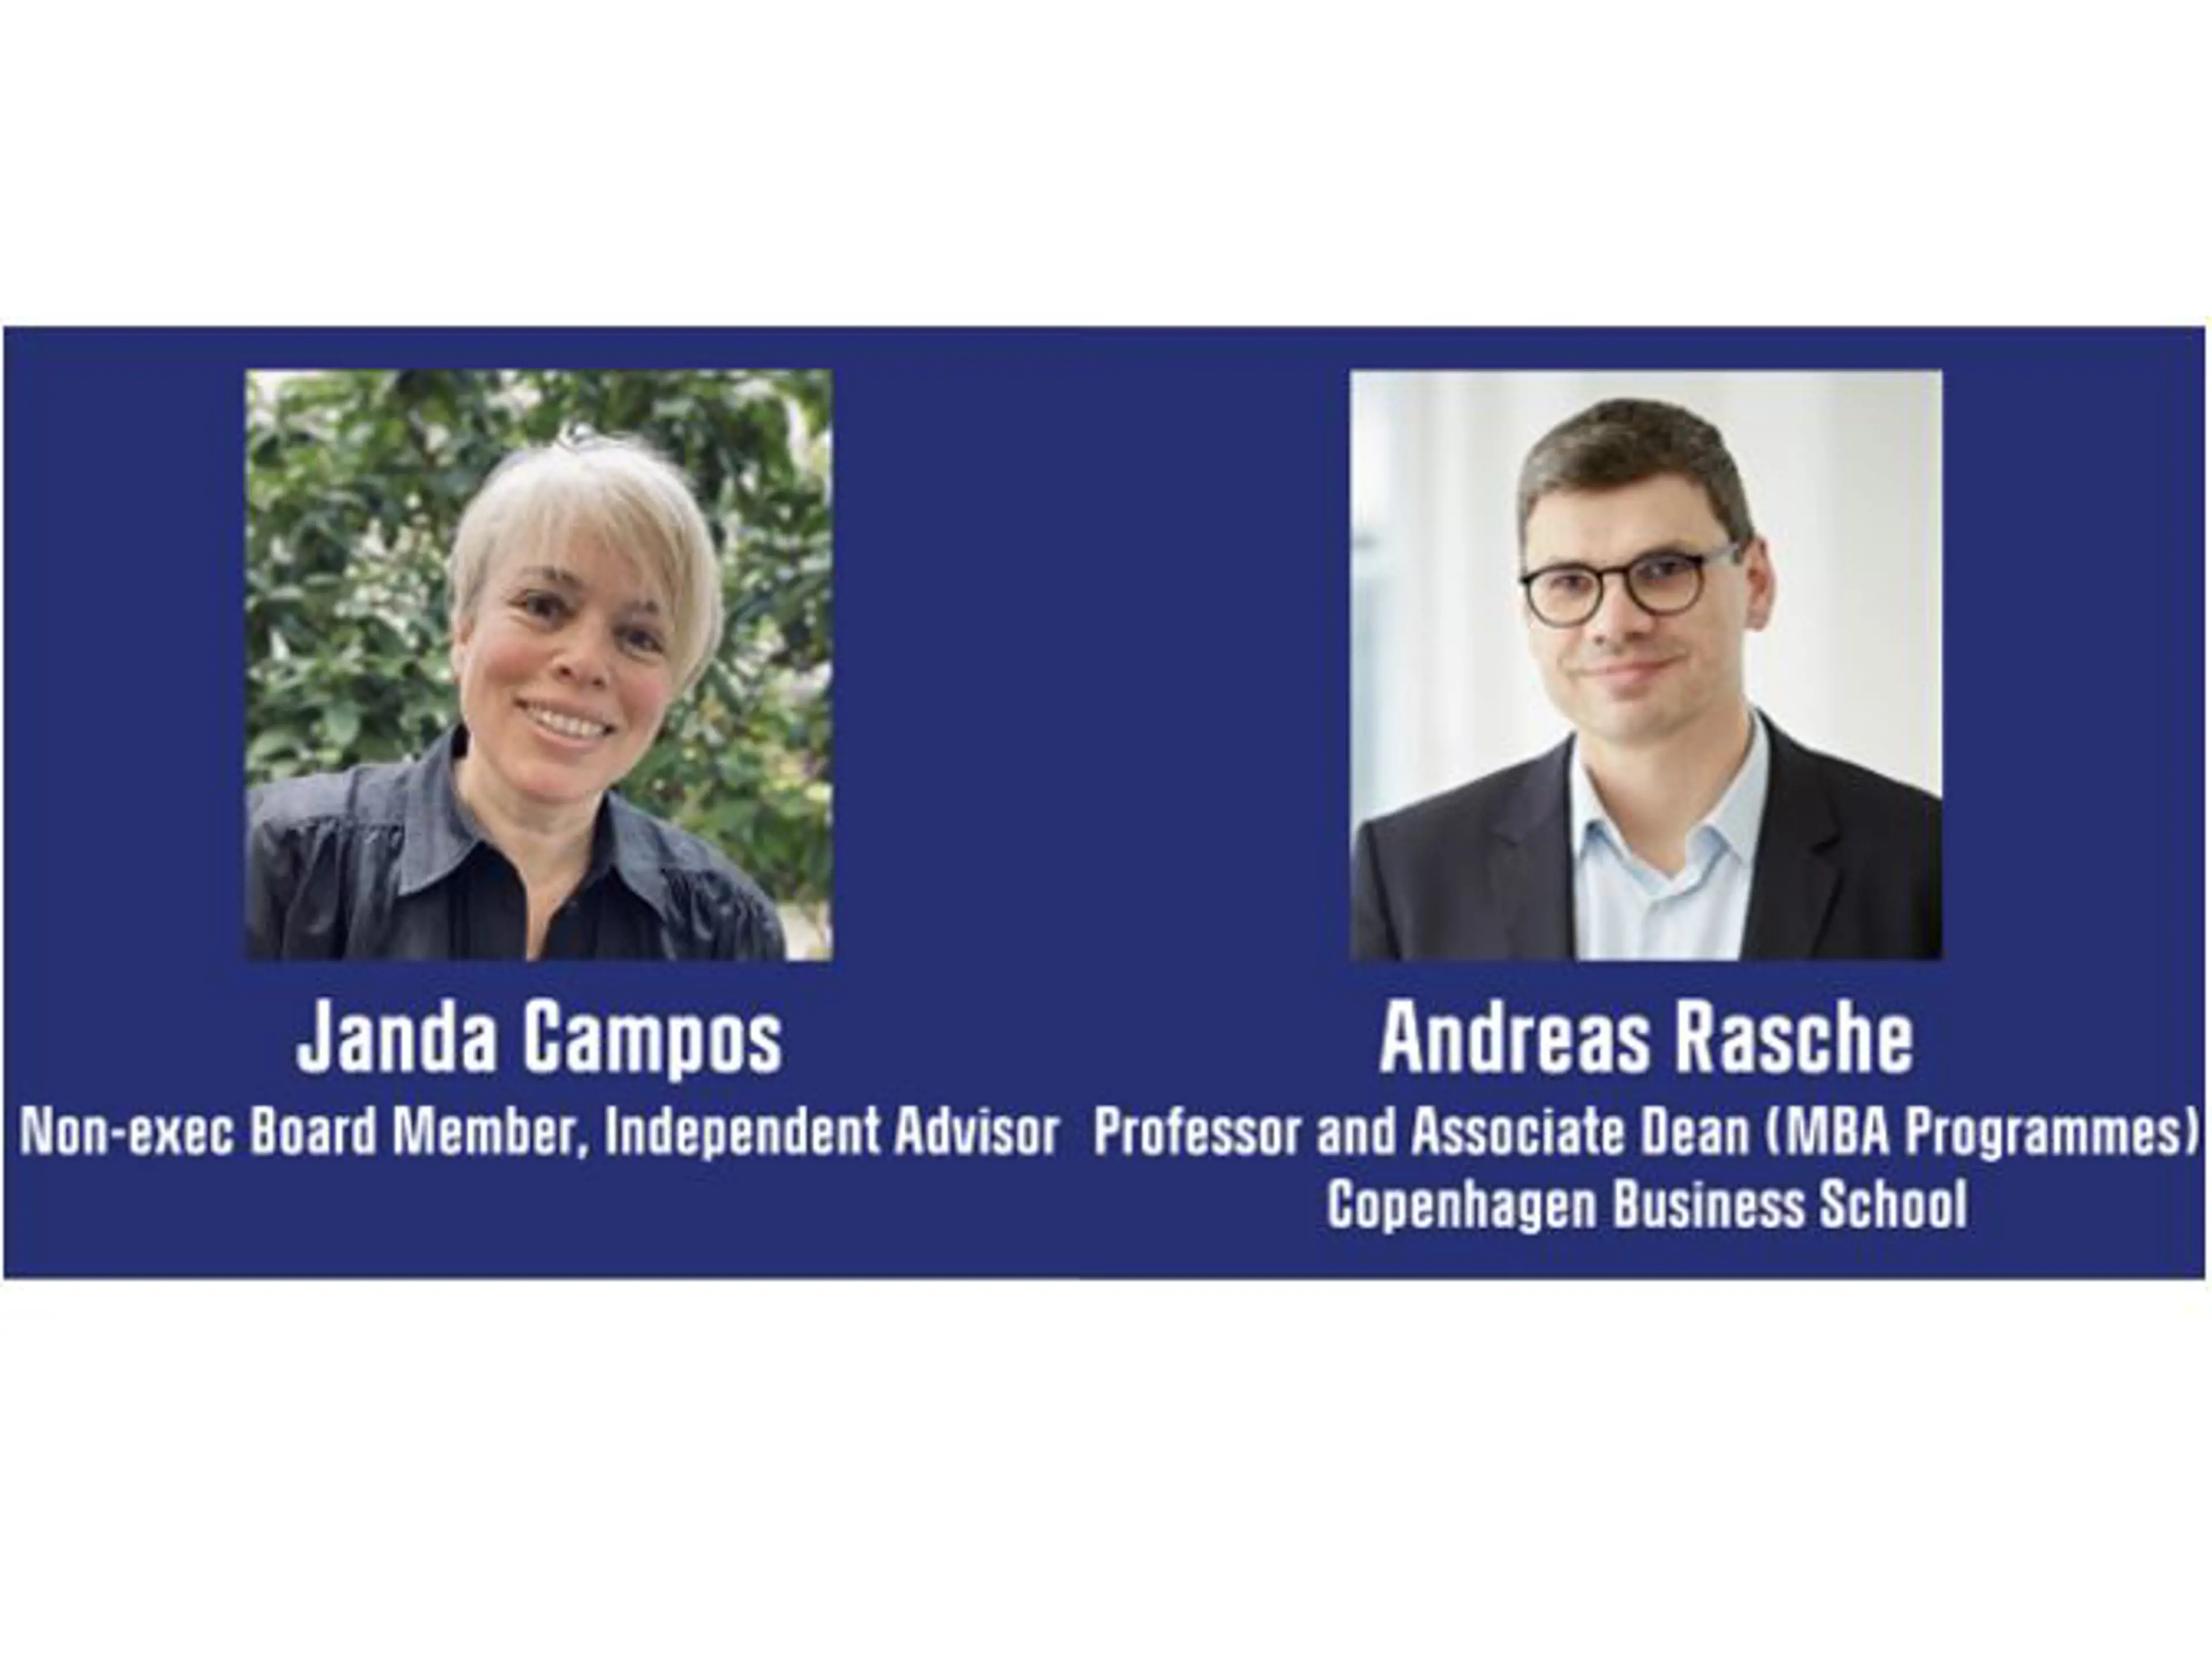 Media content on USP card for Andreas Rasche & Janda Campos on ESG Governance